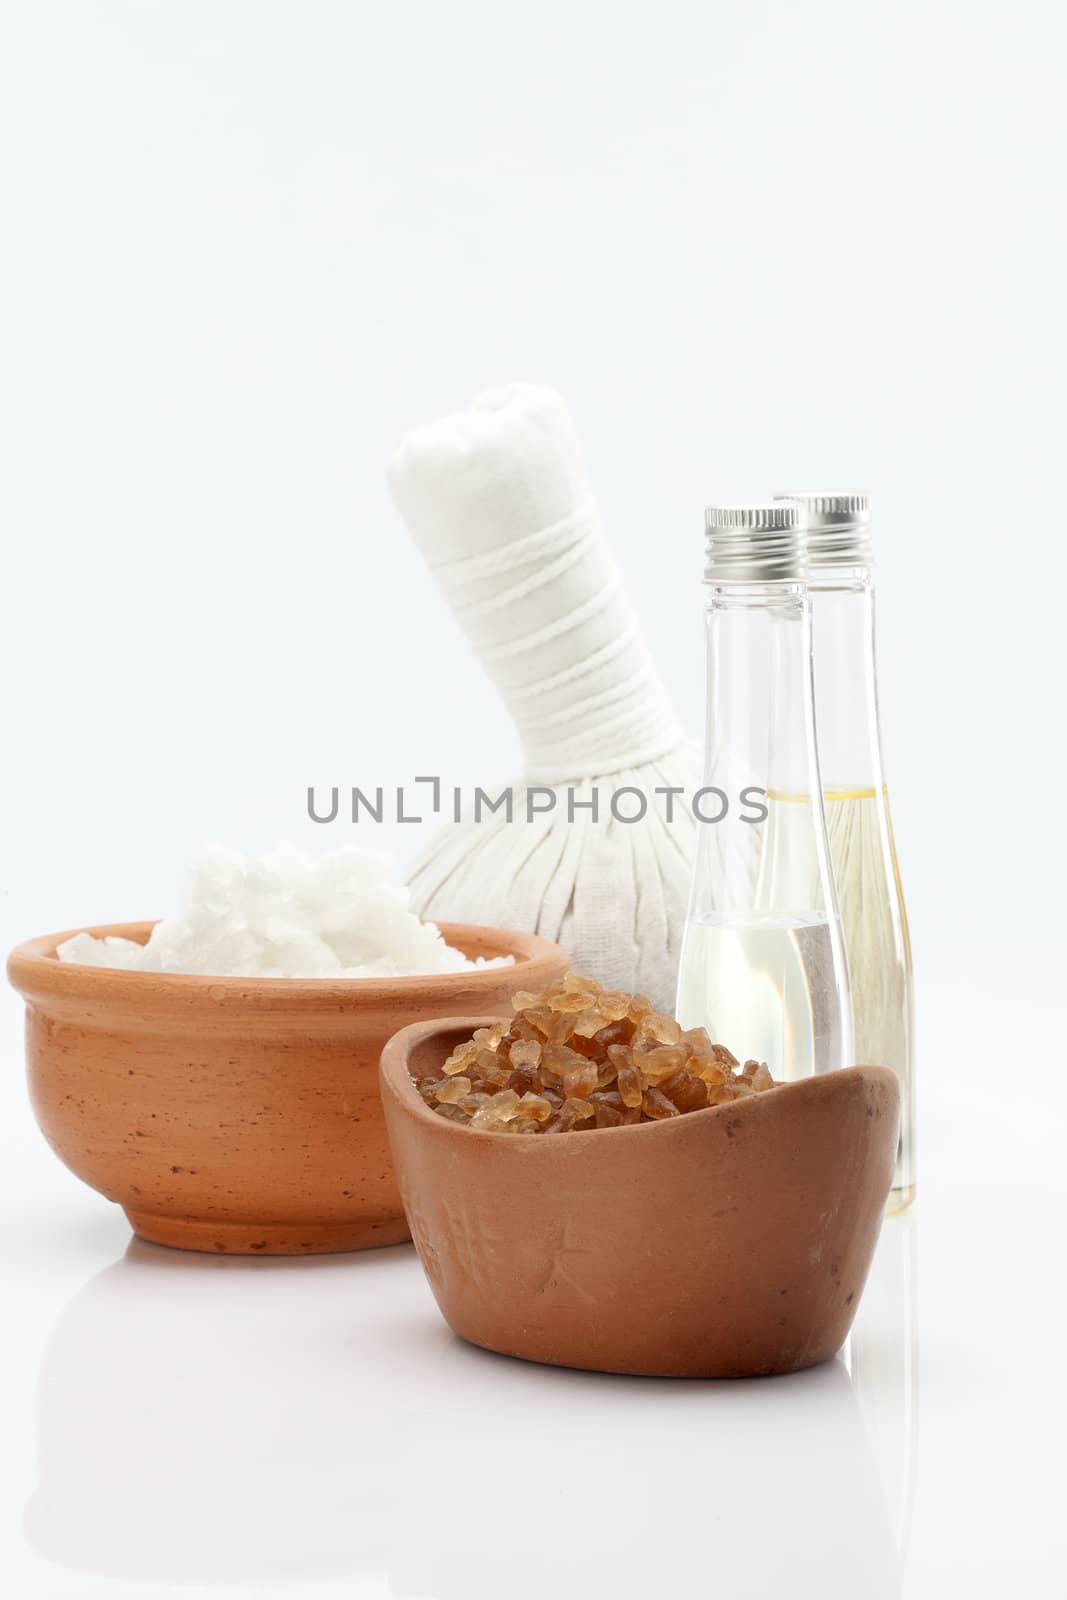 spa theme object on white background. banner.